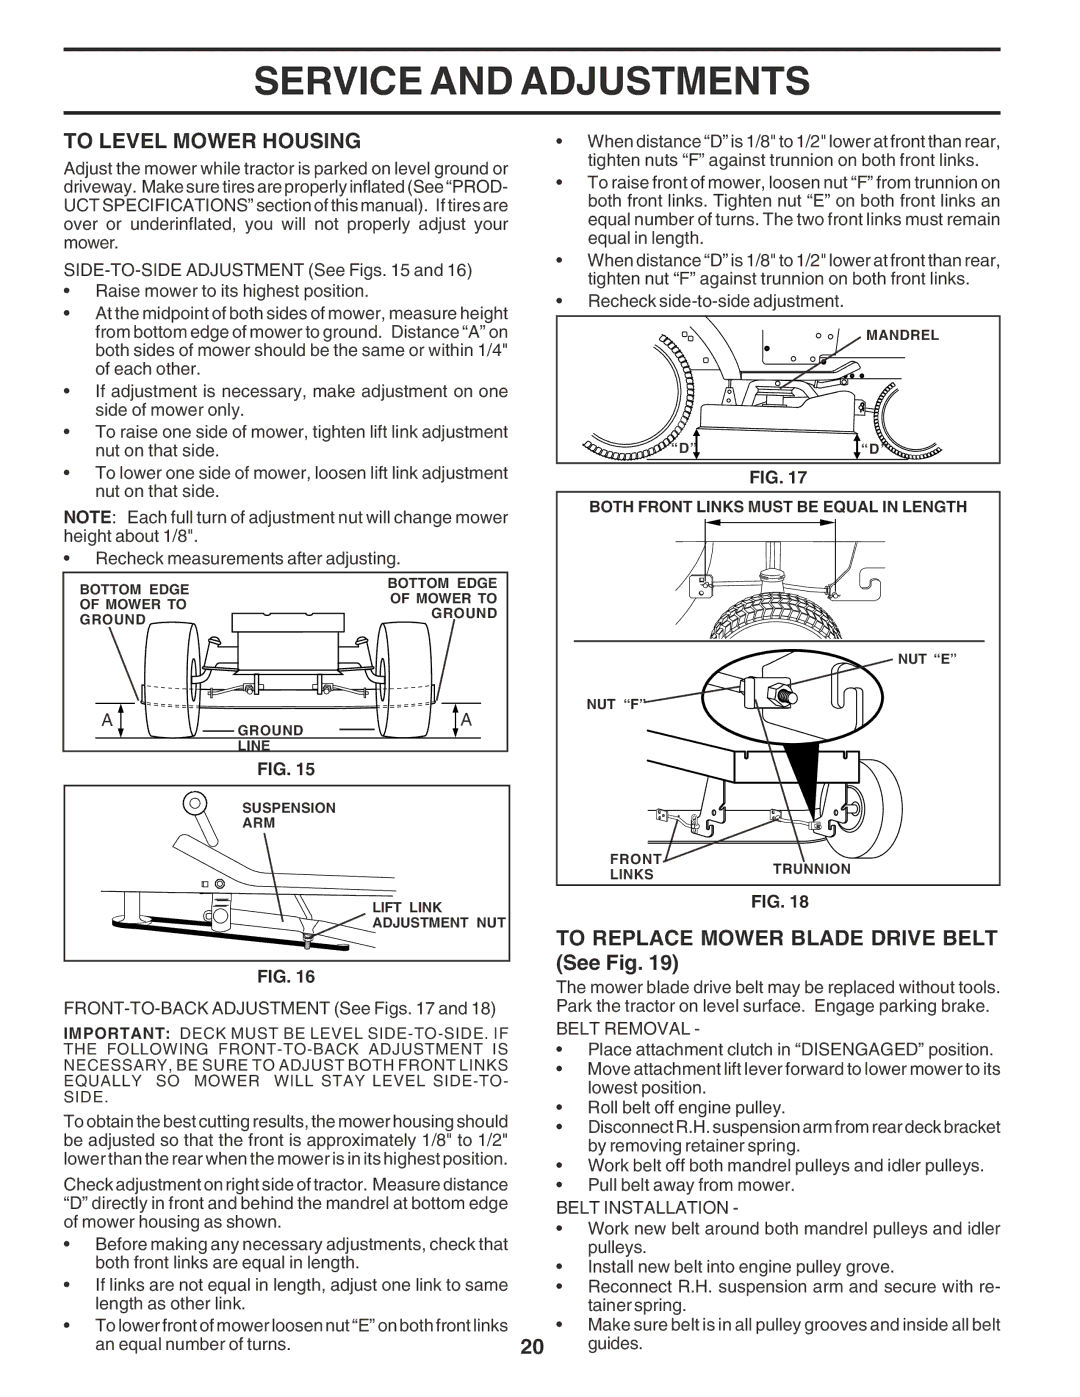 Weed Eater 183670 manual To Level Mower Housing, To Replace Mower Blade Drive Belt See Fig, Belt Removal, Belt Installation 